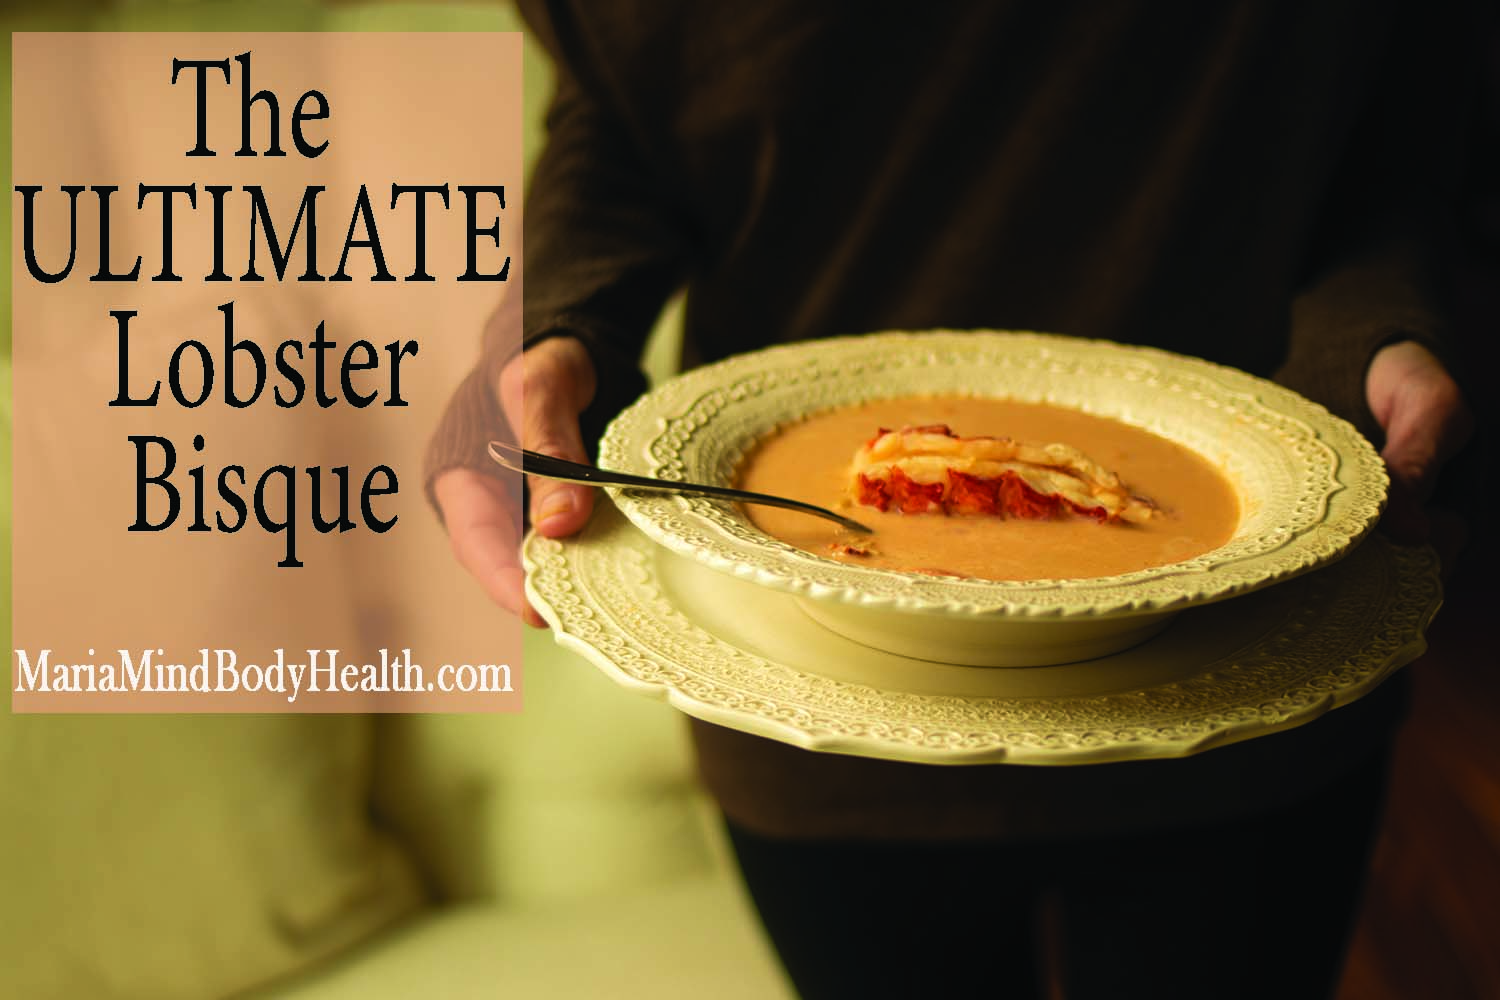 The ULTIMATE Lobster Bisque